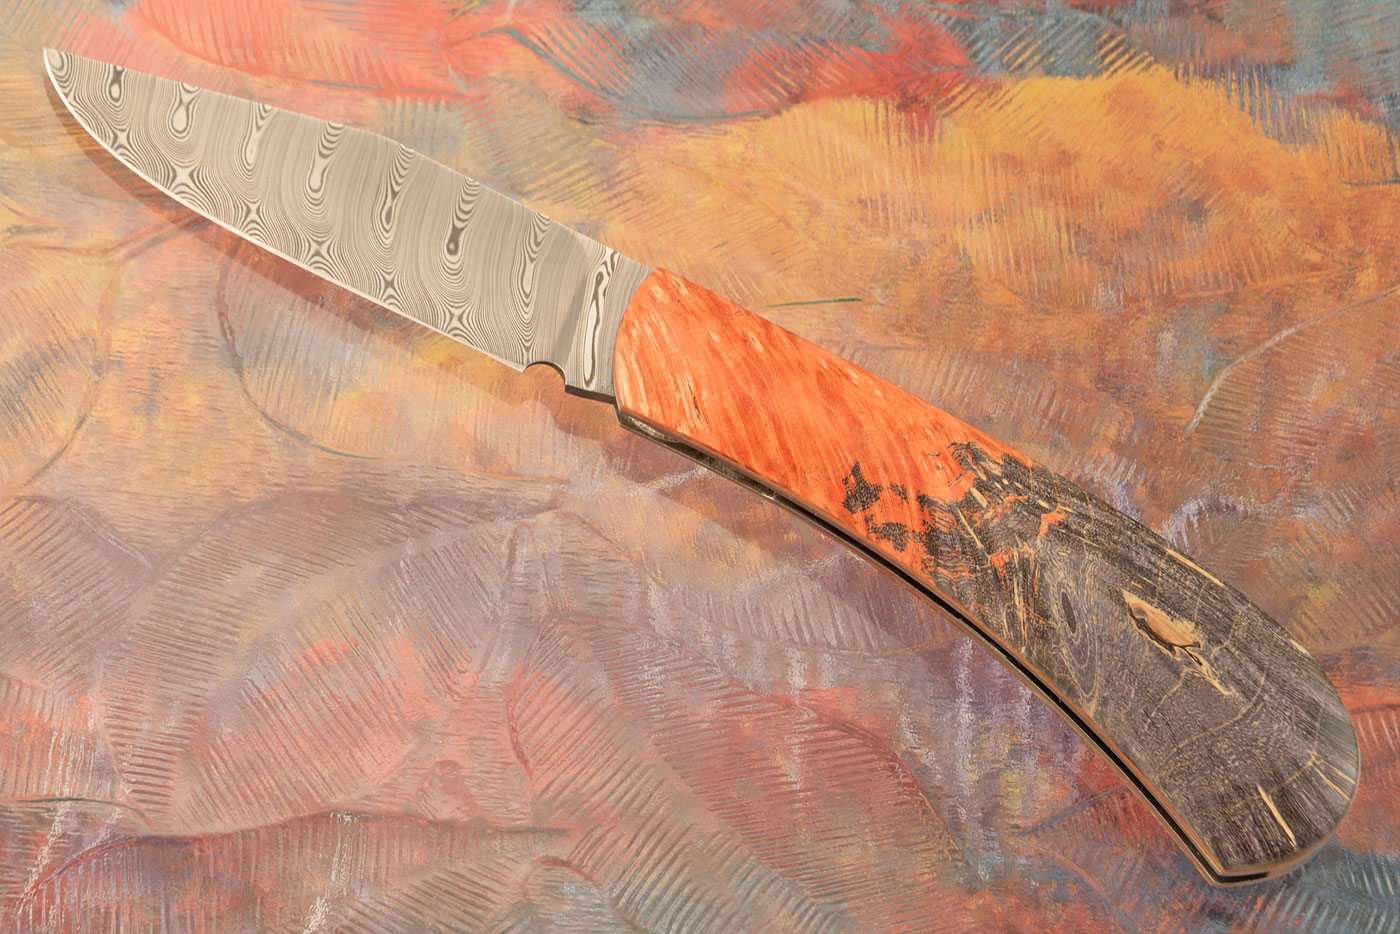 Lanny's Clip Slipjoint with Damasteel and Dyed Maple Burl